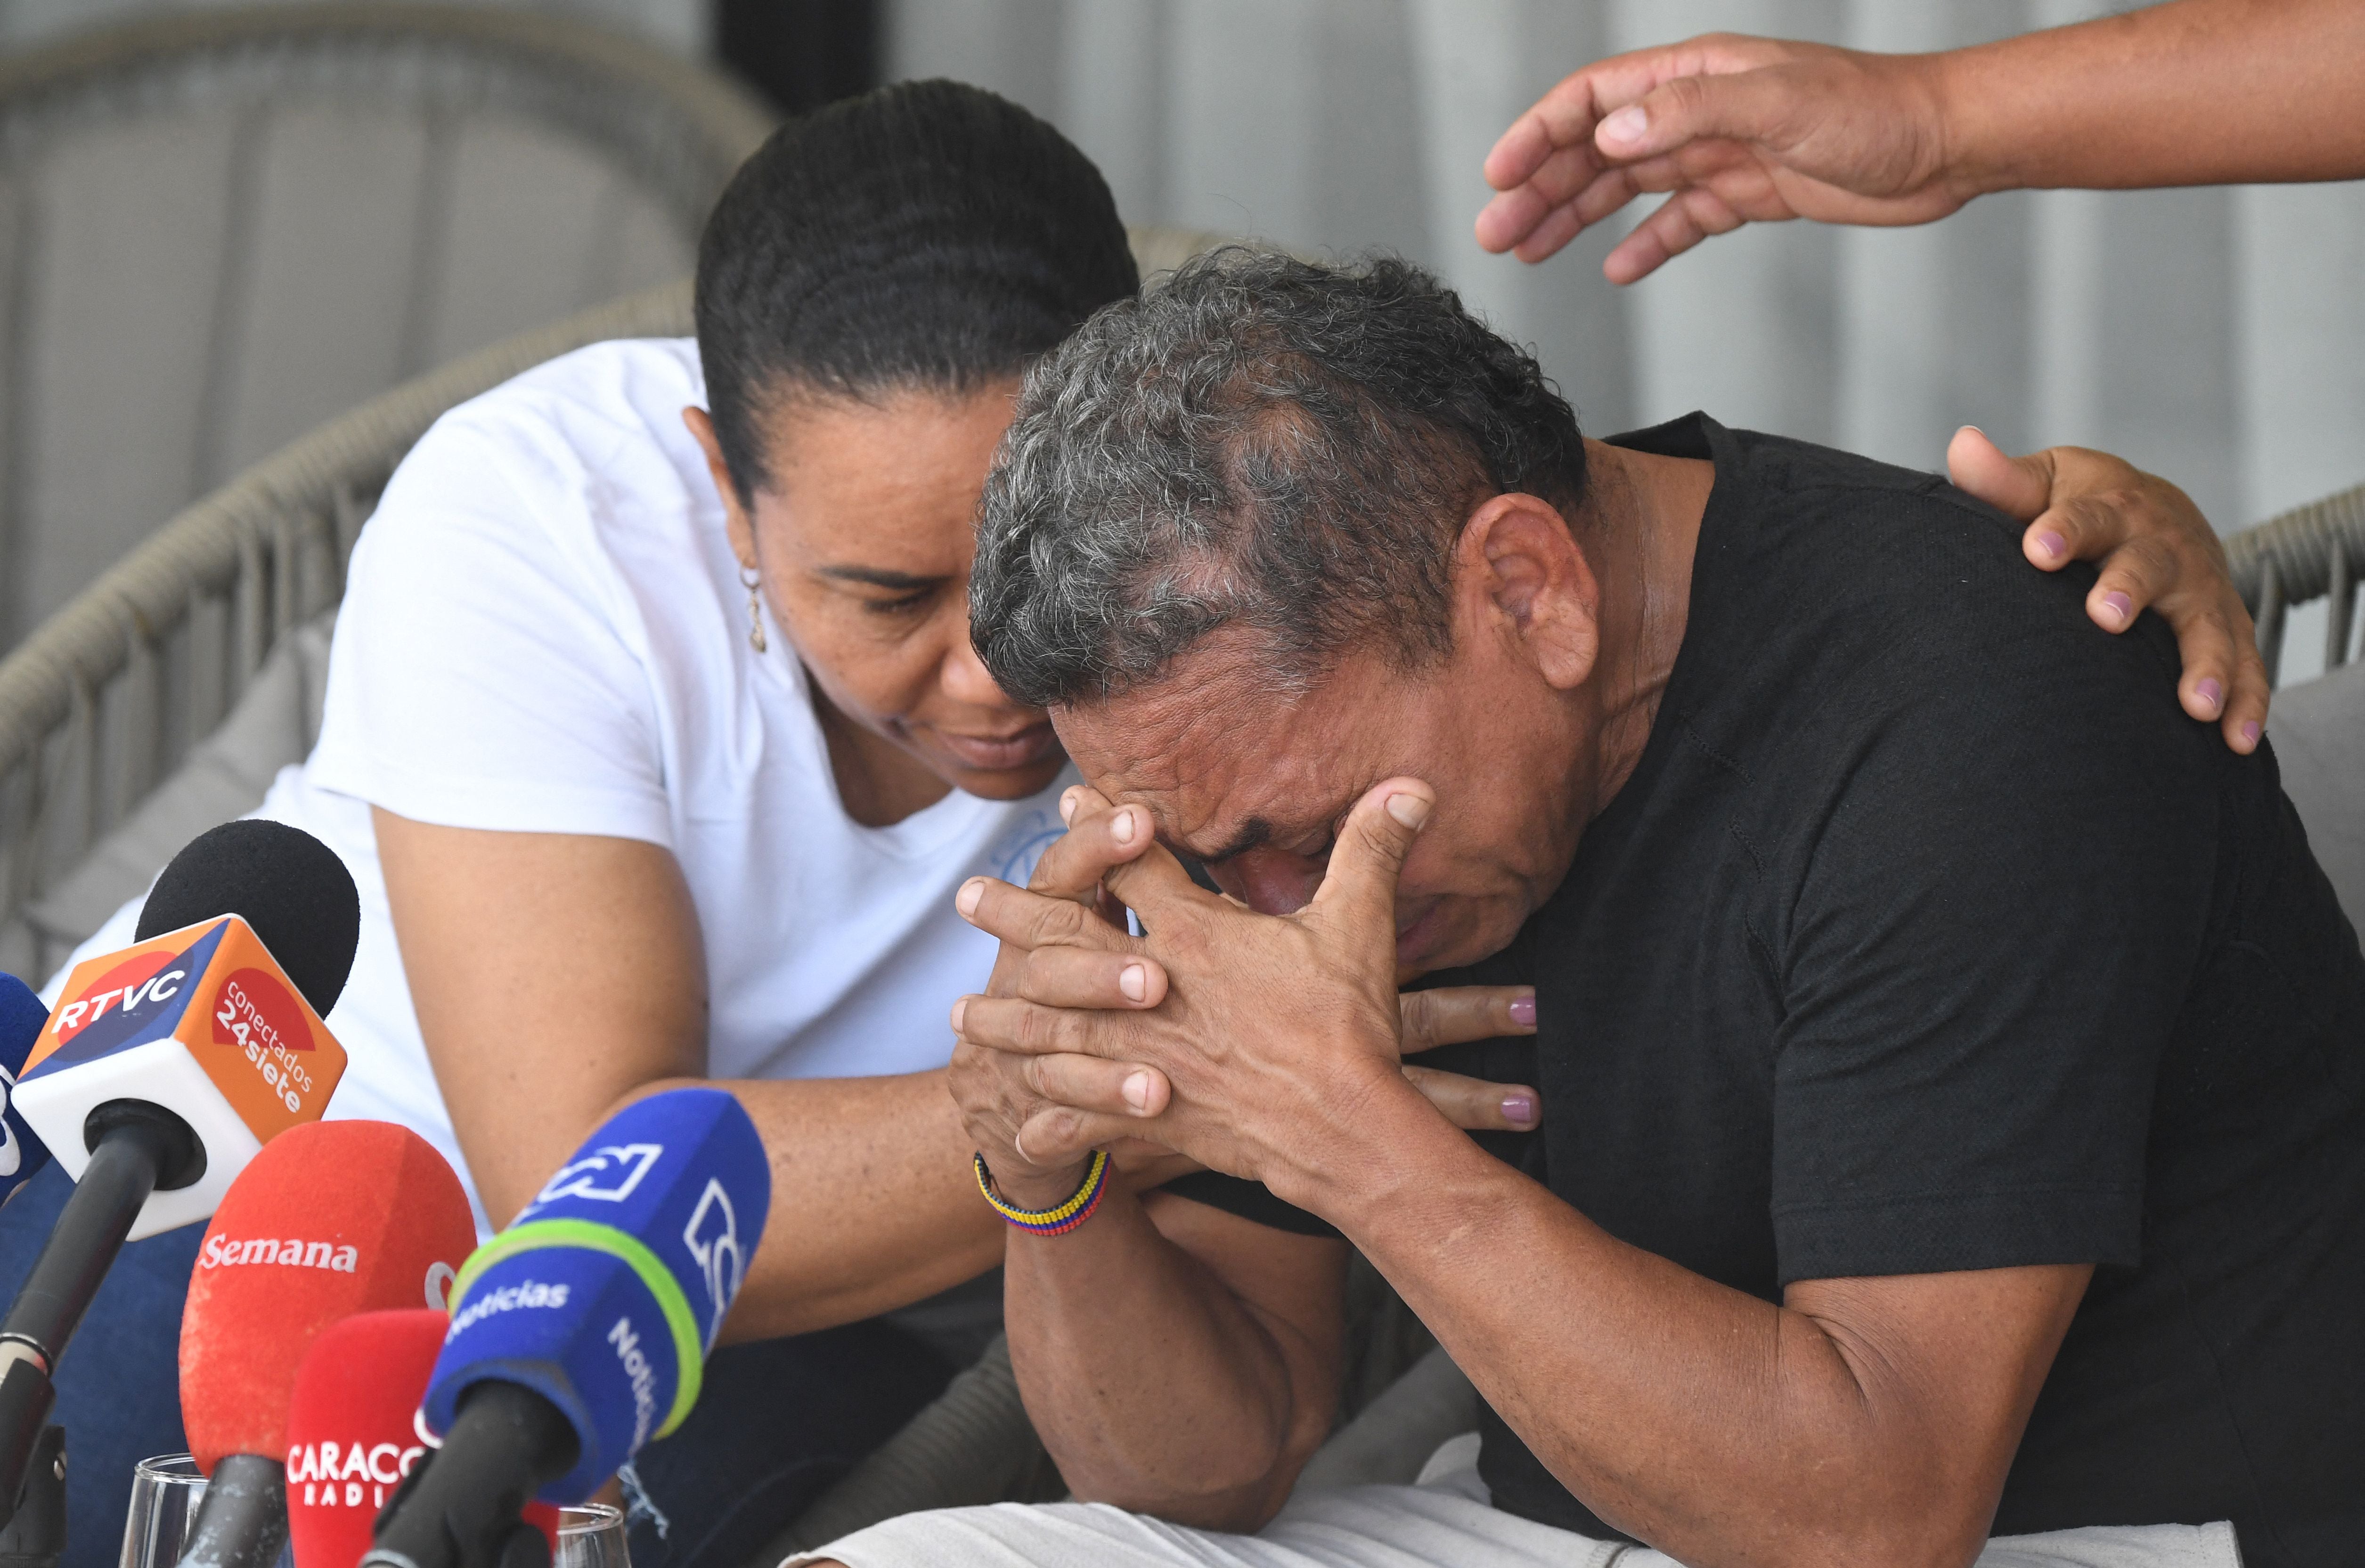 Luis Manuel Diaz, father of Liverpool's forward Luis Diaz, is consoled by his wife Cilenis Marulanda during a press conference at his house in Barrancas